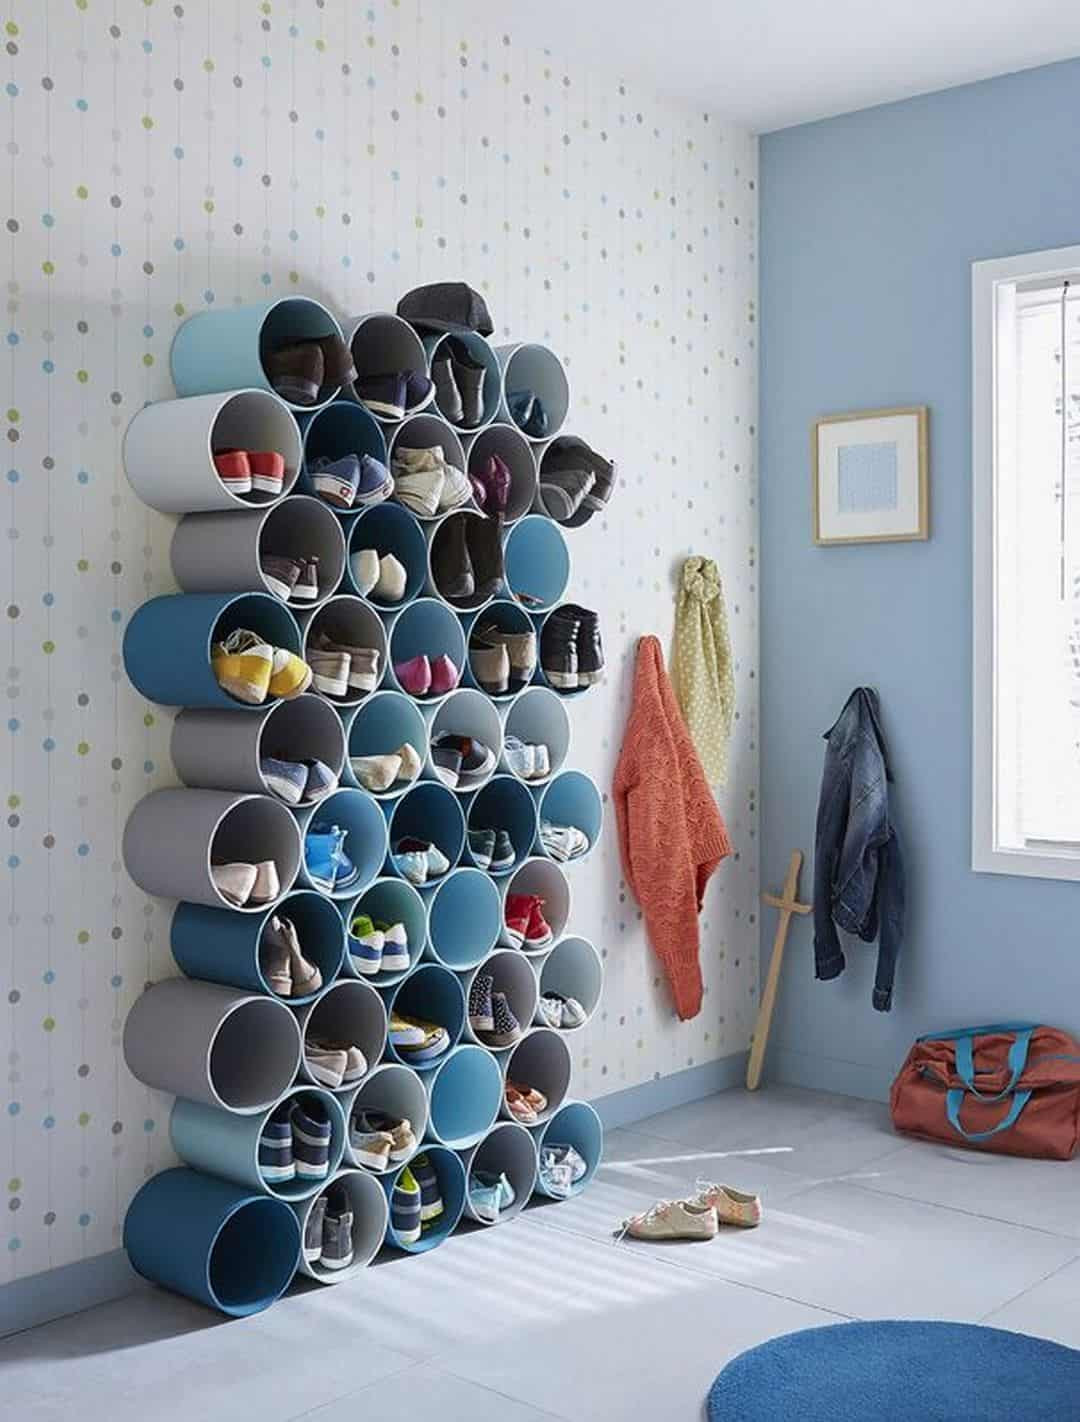 38 Best Simple DIY Shoe Racks You’ll Want To Make,shoe rack ideas pinterest,shoe rack ideas diy,shoe storage ideas for small spaces